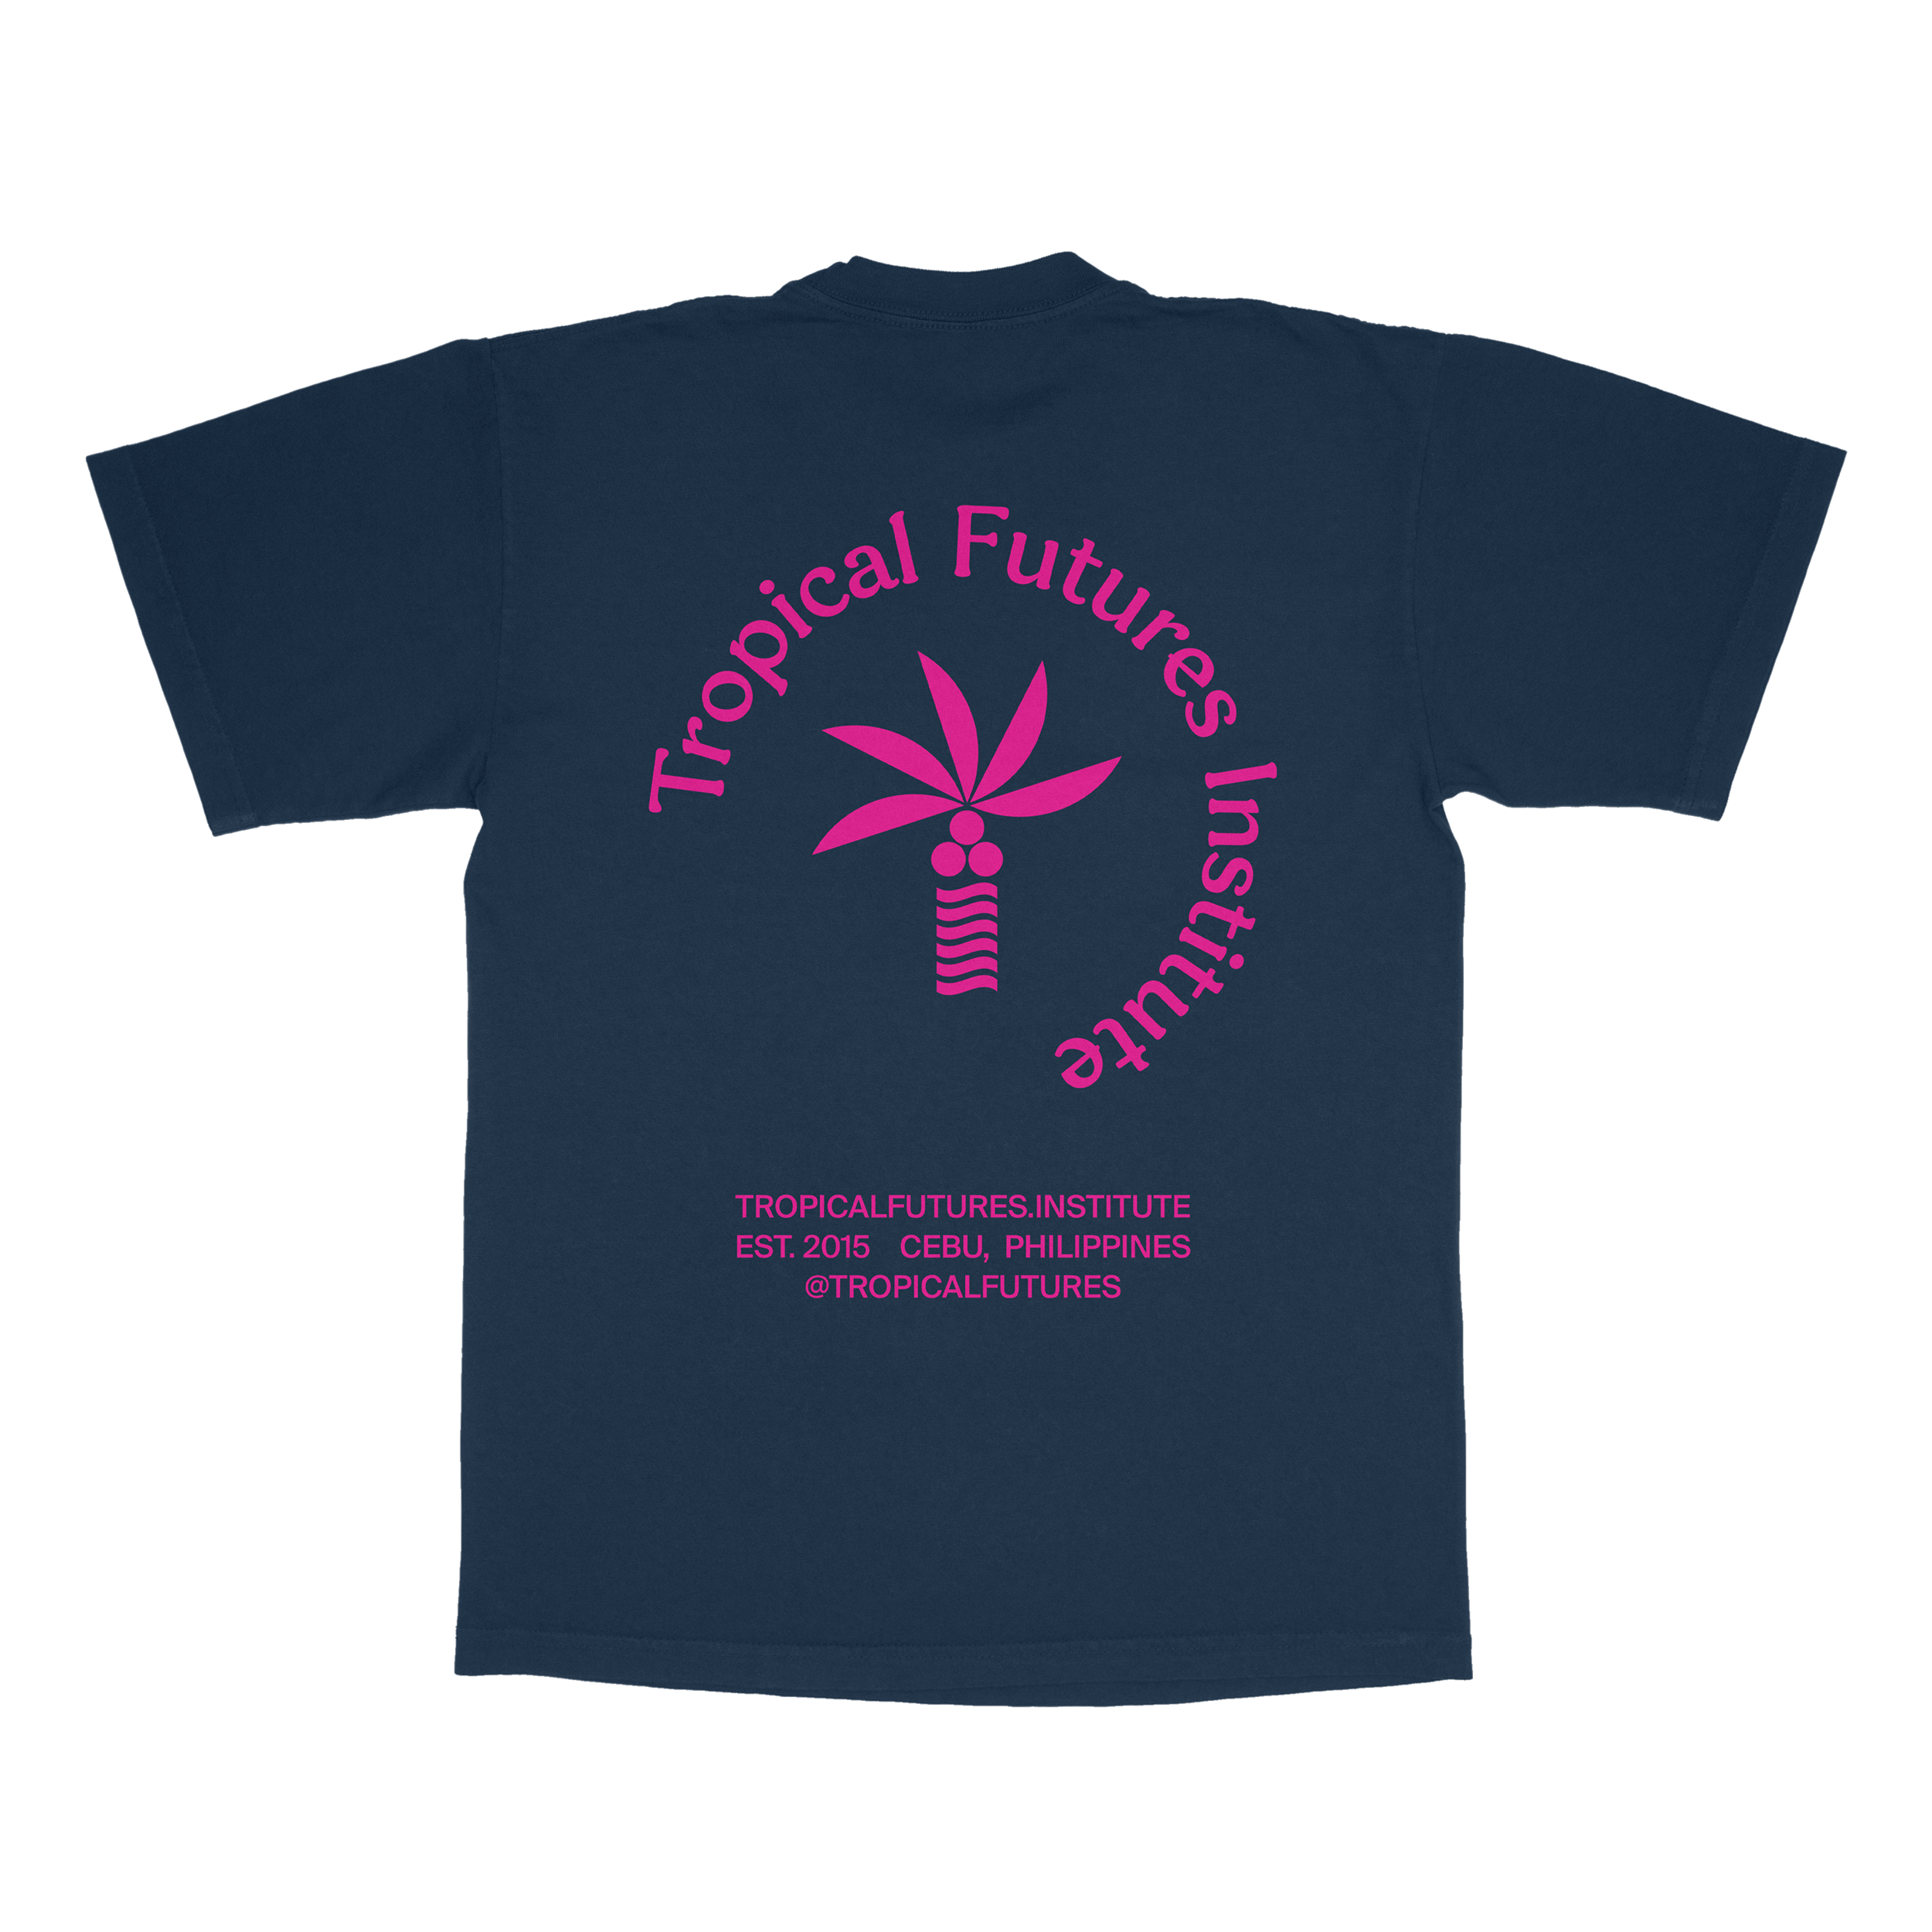 Great Tropical Music Magenta on Navy Blue Tee